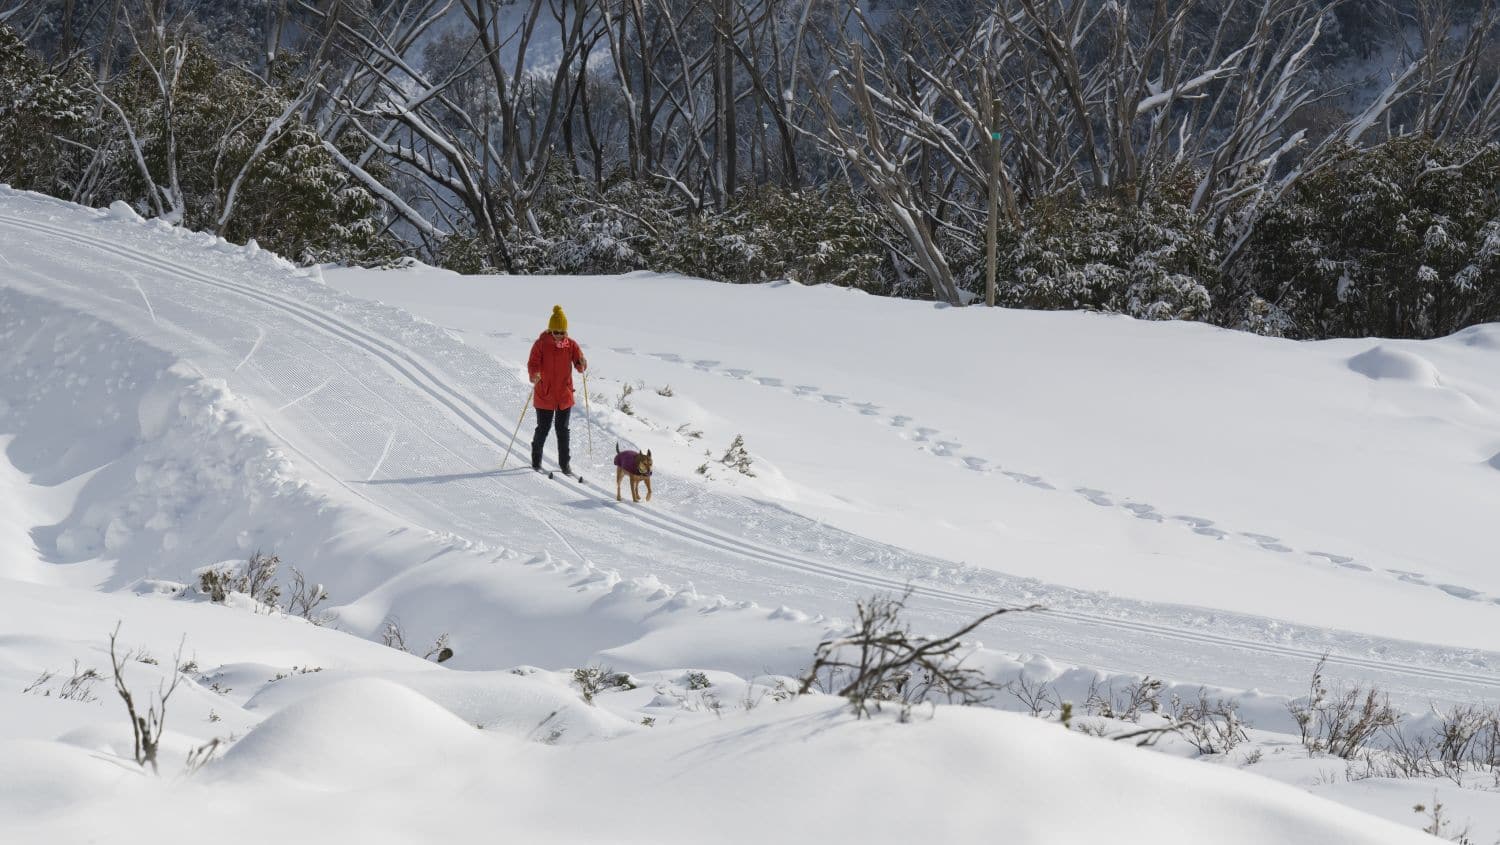 Cross Country Skiing at Falls Creek with dog